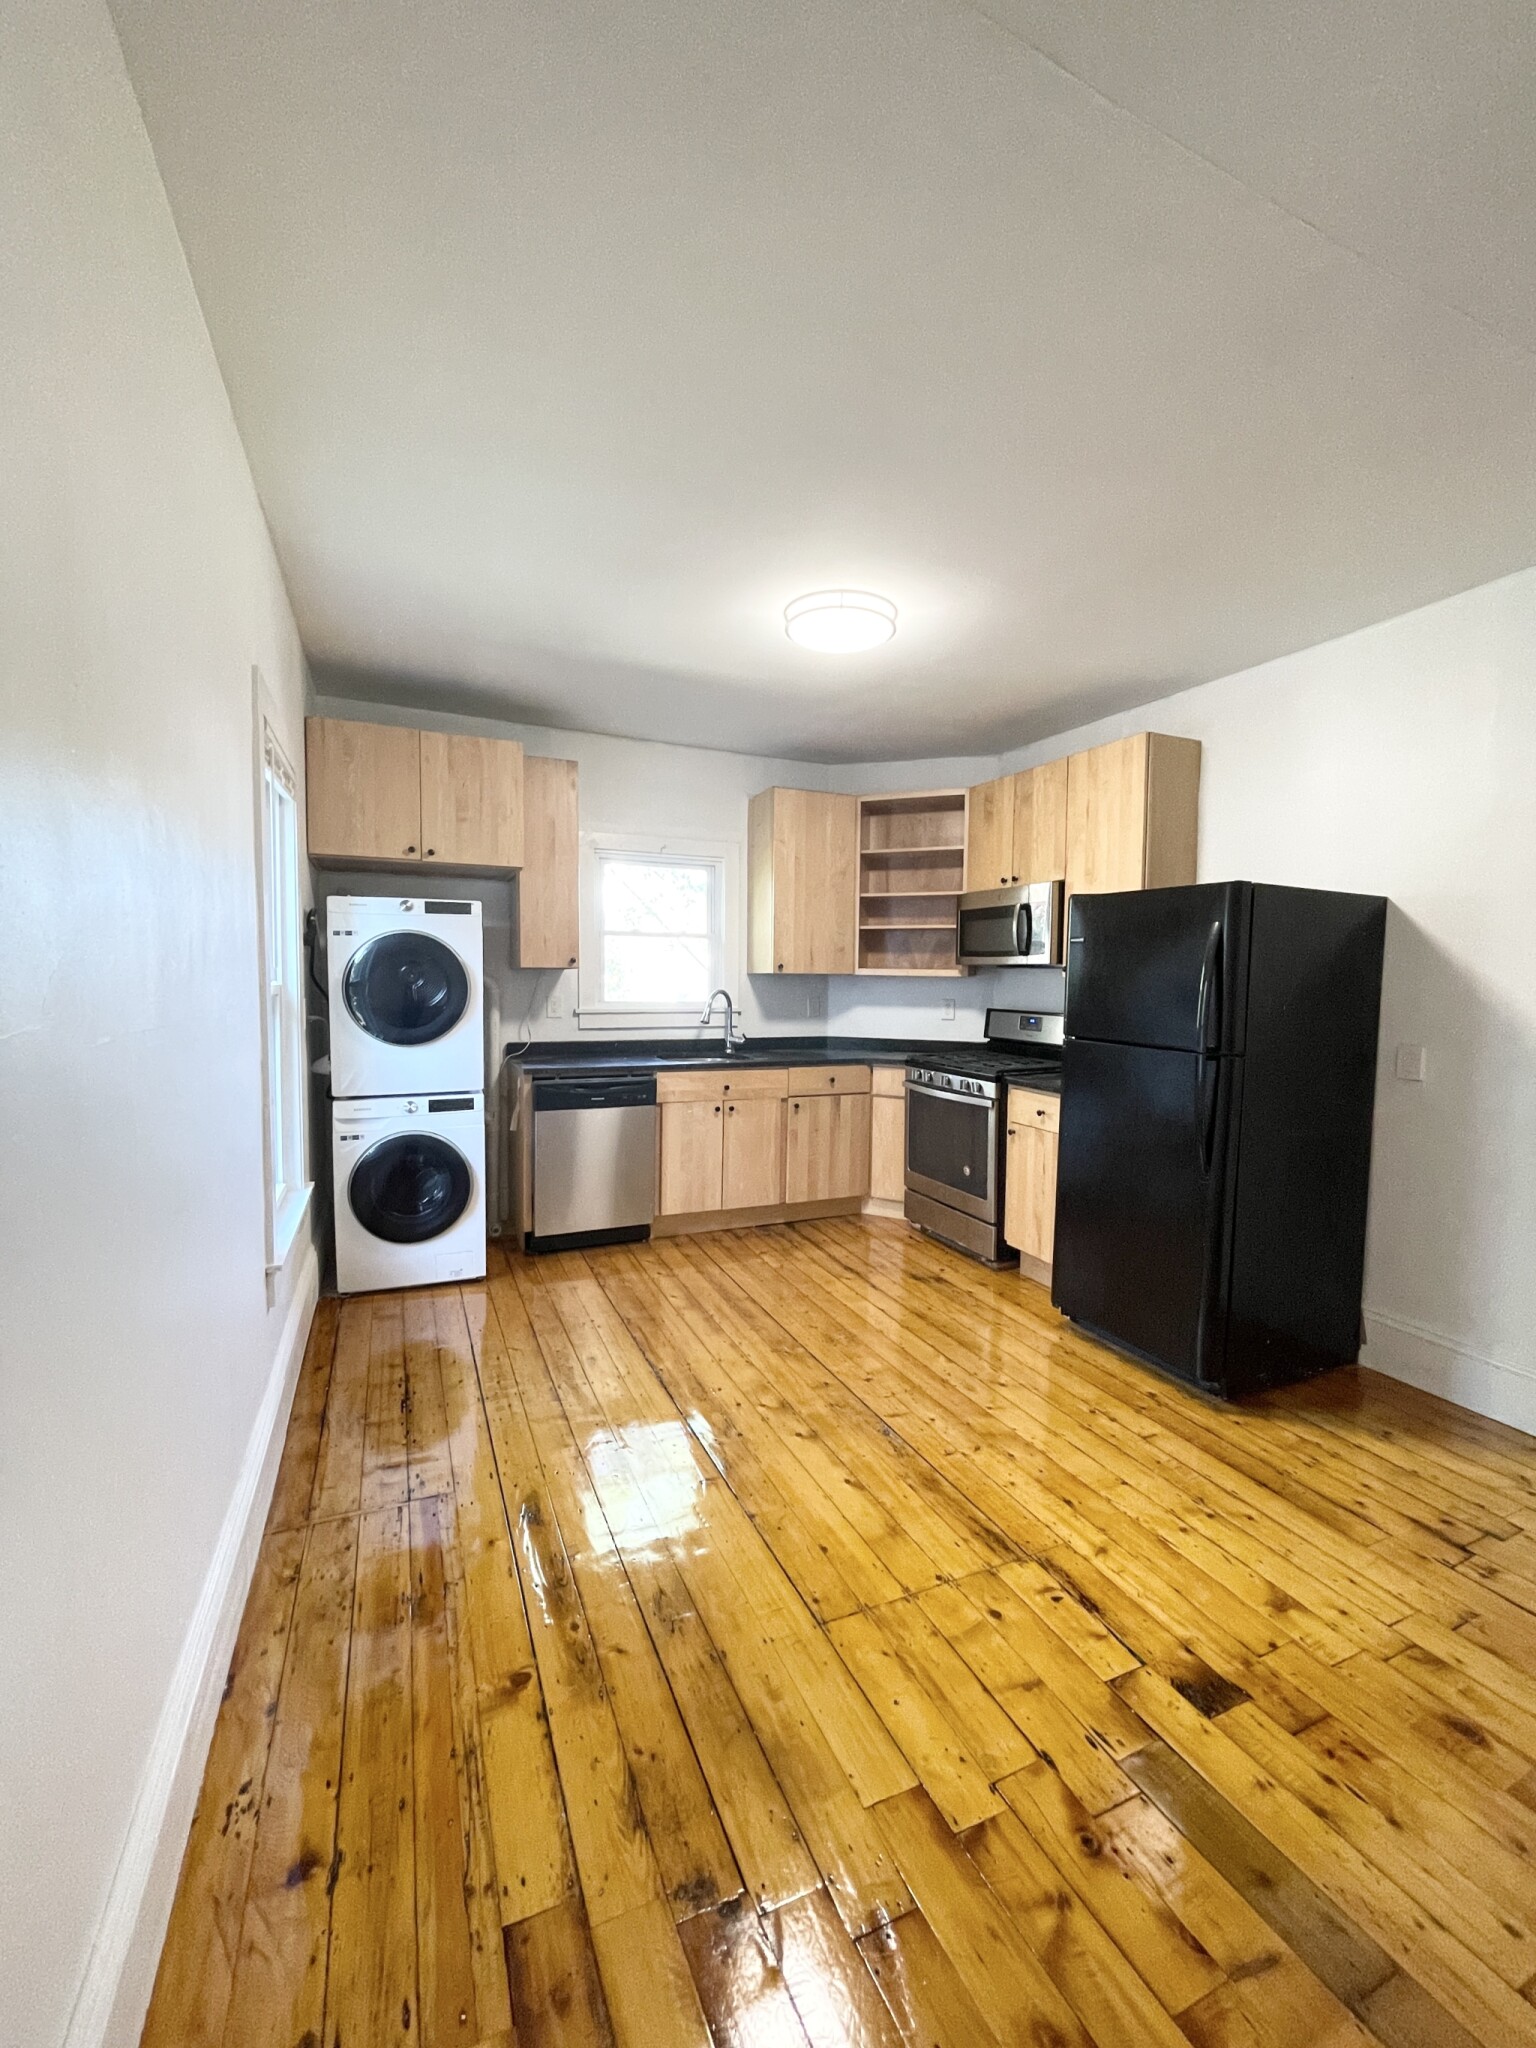 Photos of apartment on Porter St.,Somerville MA 02143